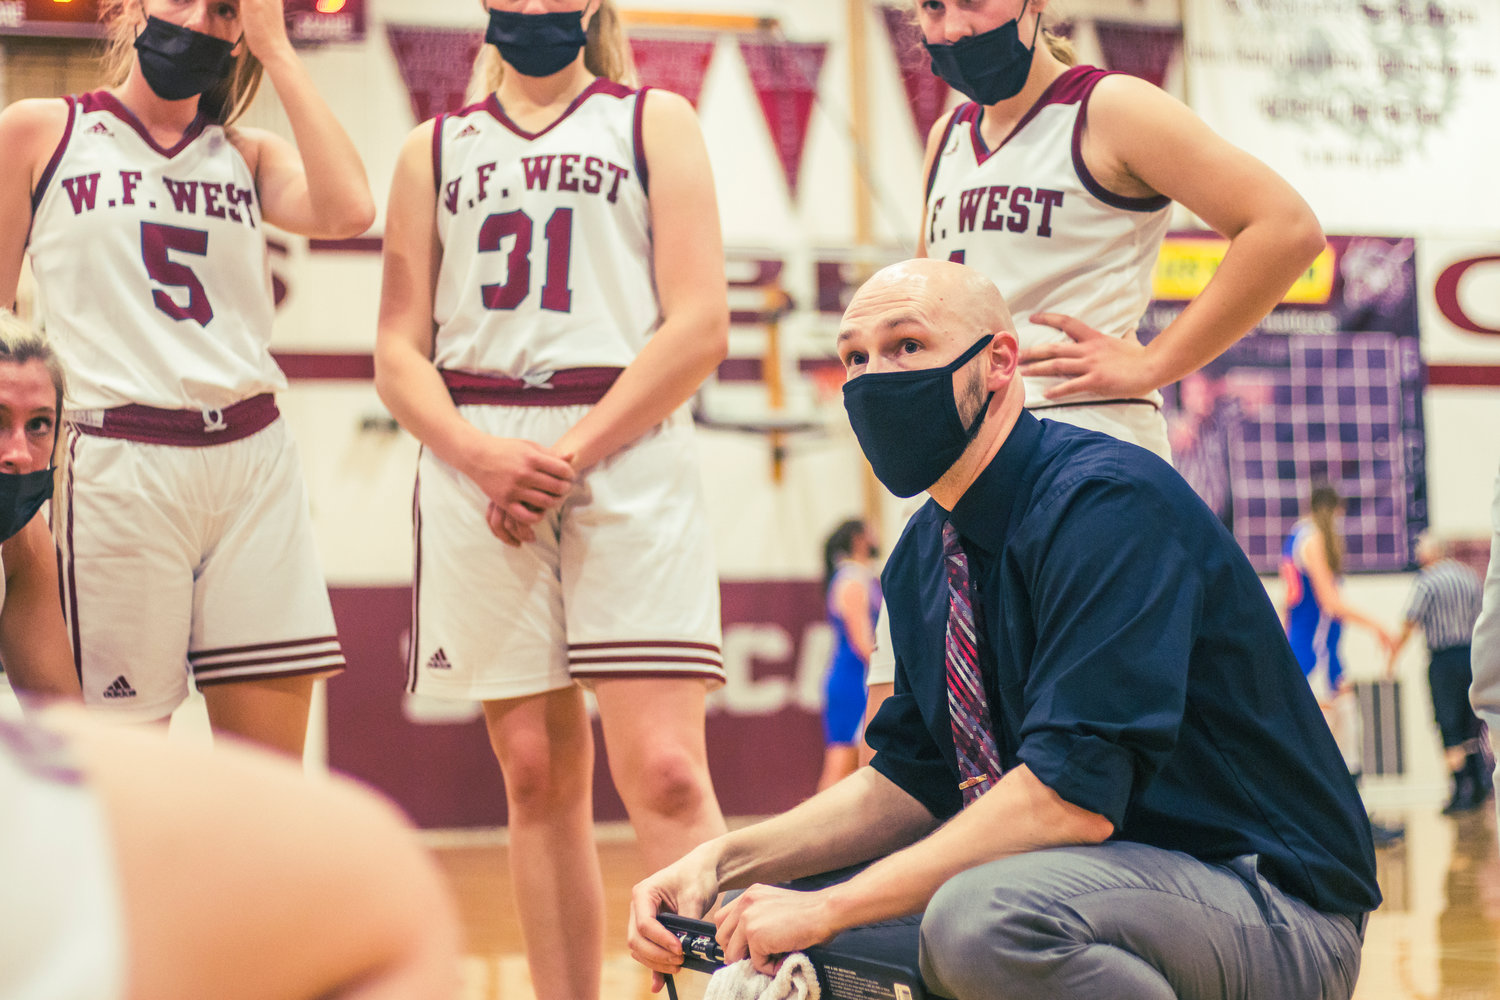 W.F. West's coach Kyle Karnofski talks to players during a game against Ridgefield in Chehalis Wednesday night.